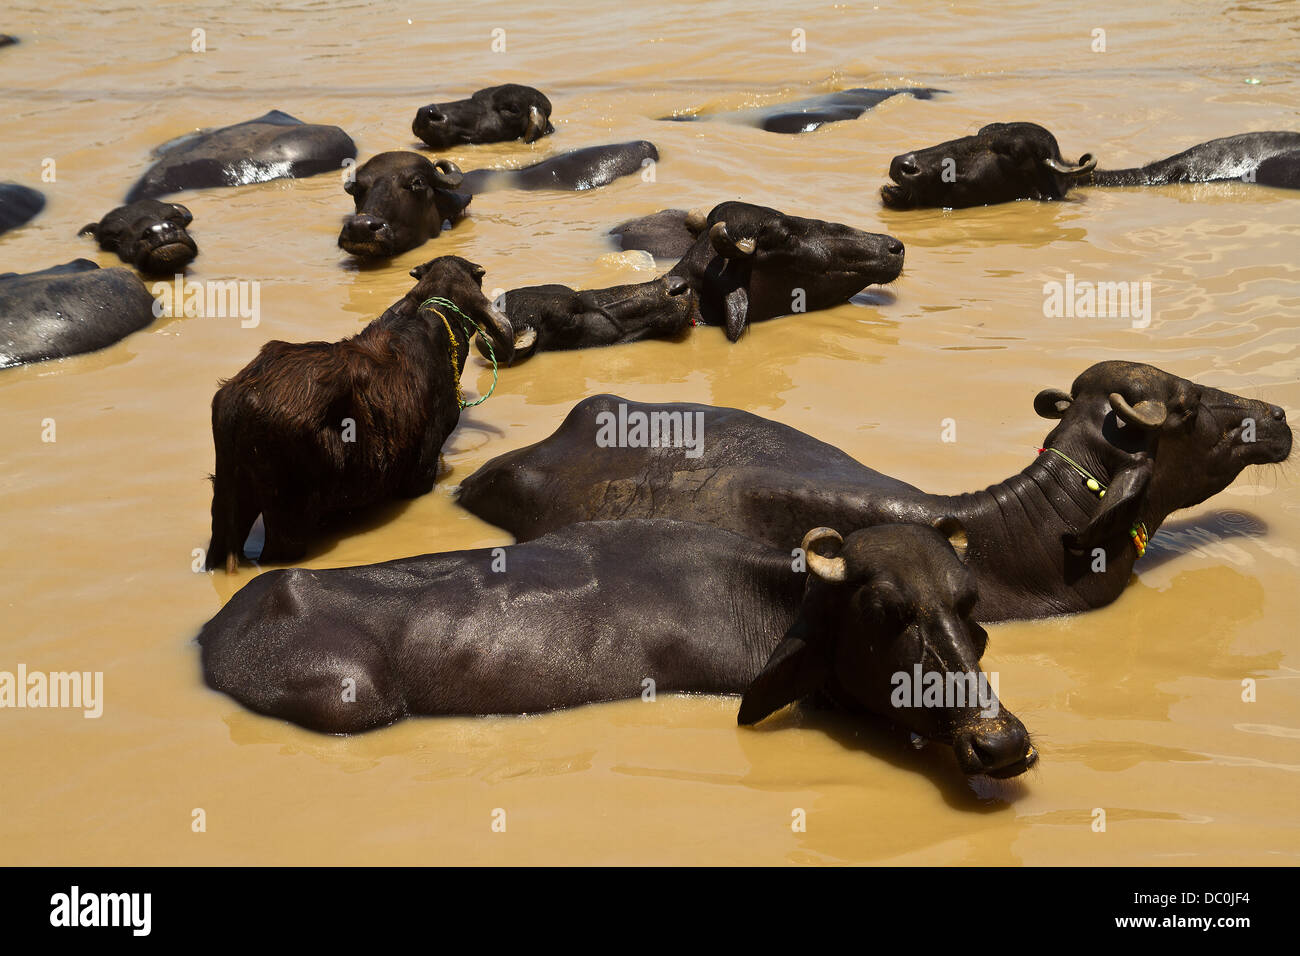 Cows Bathing In River High Resolution Stock Photography and Images - Alamy